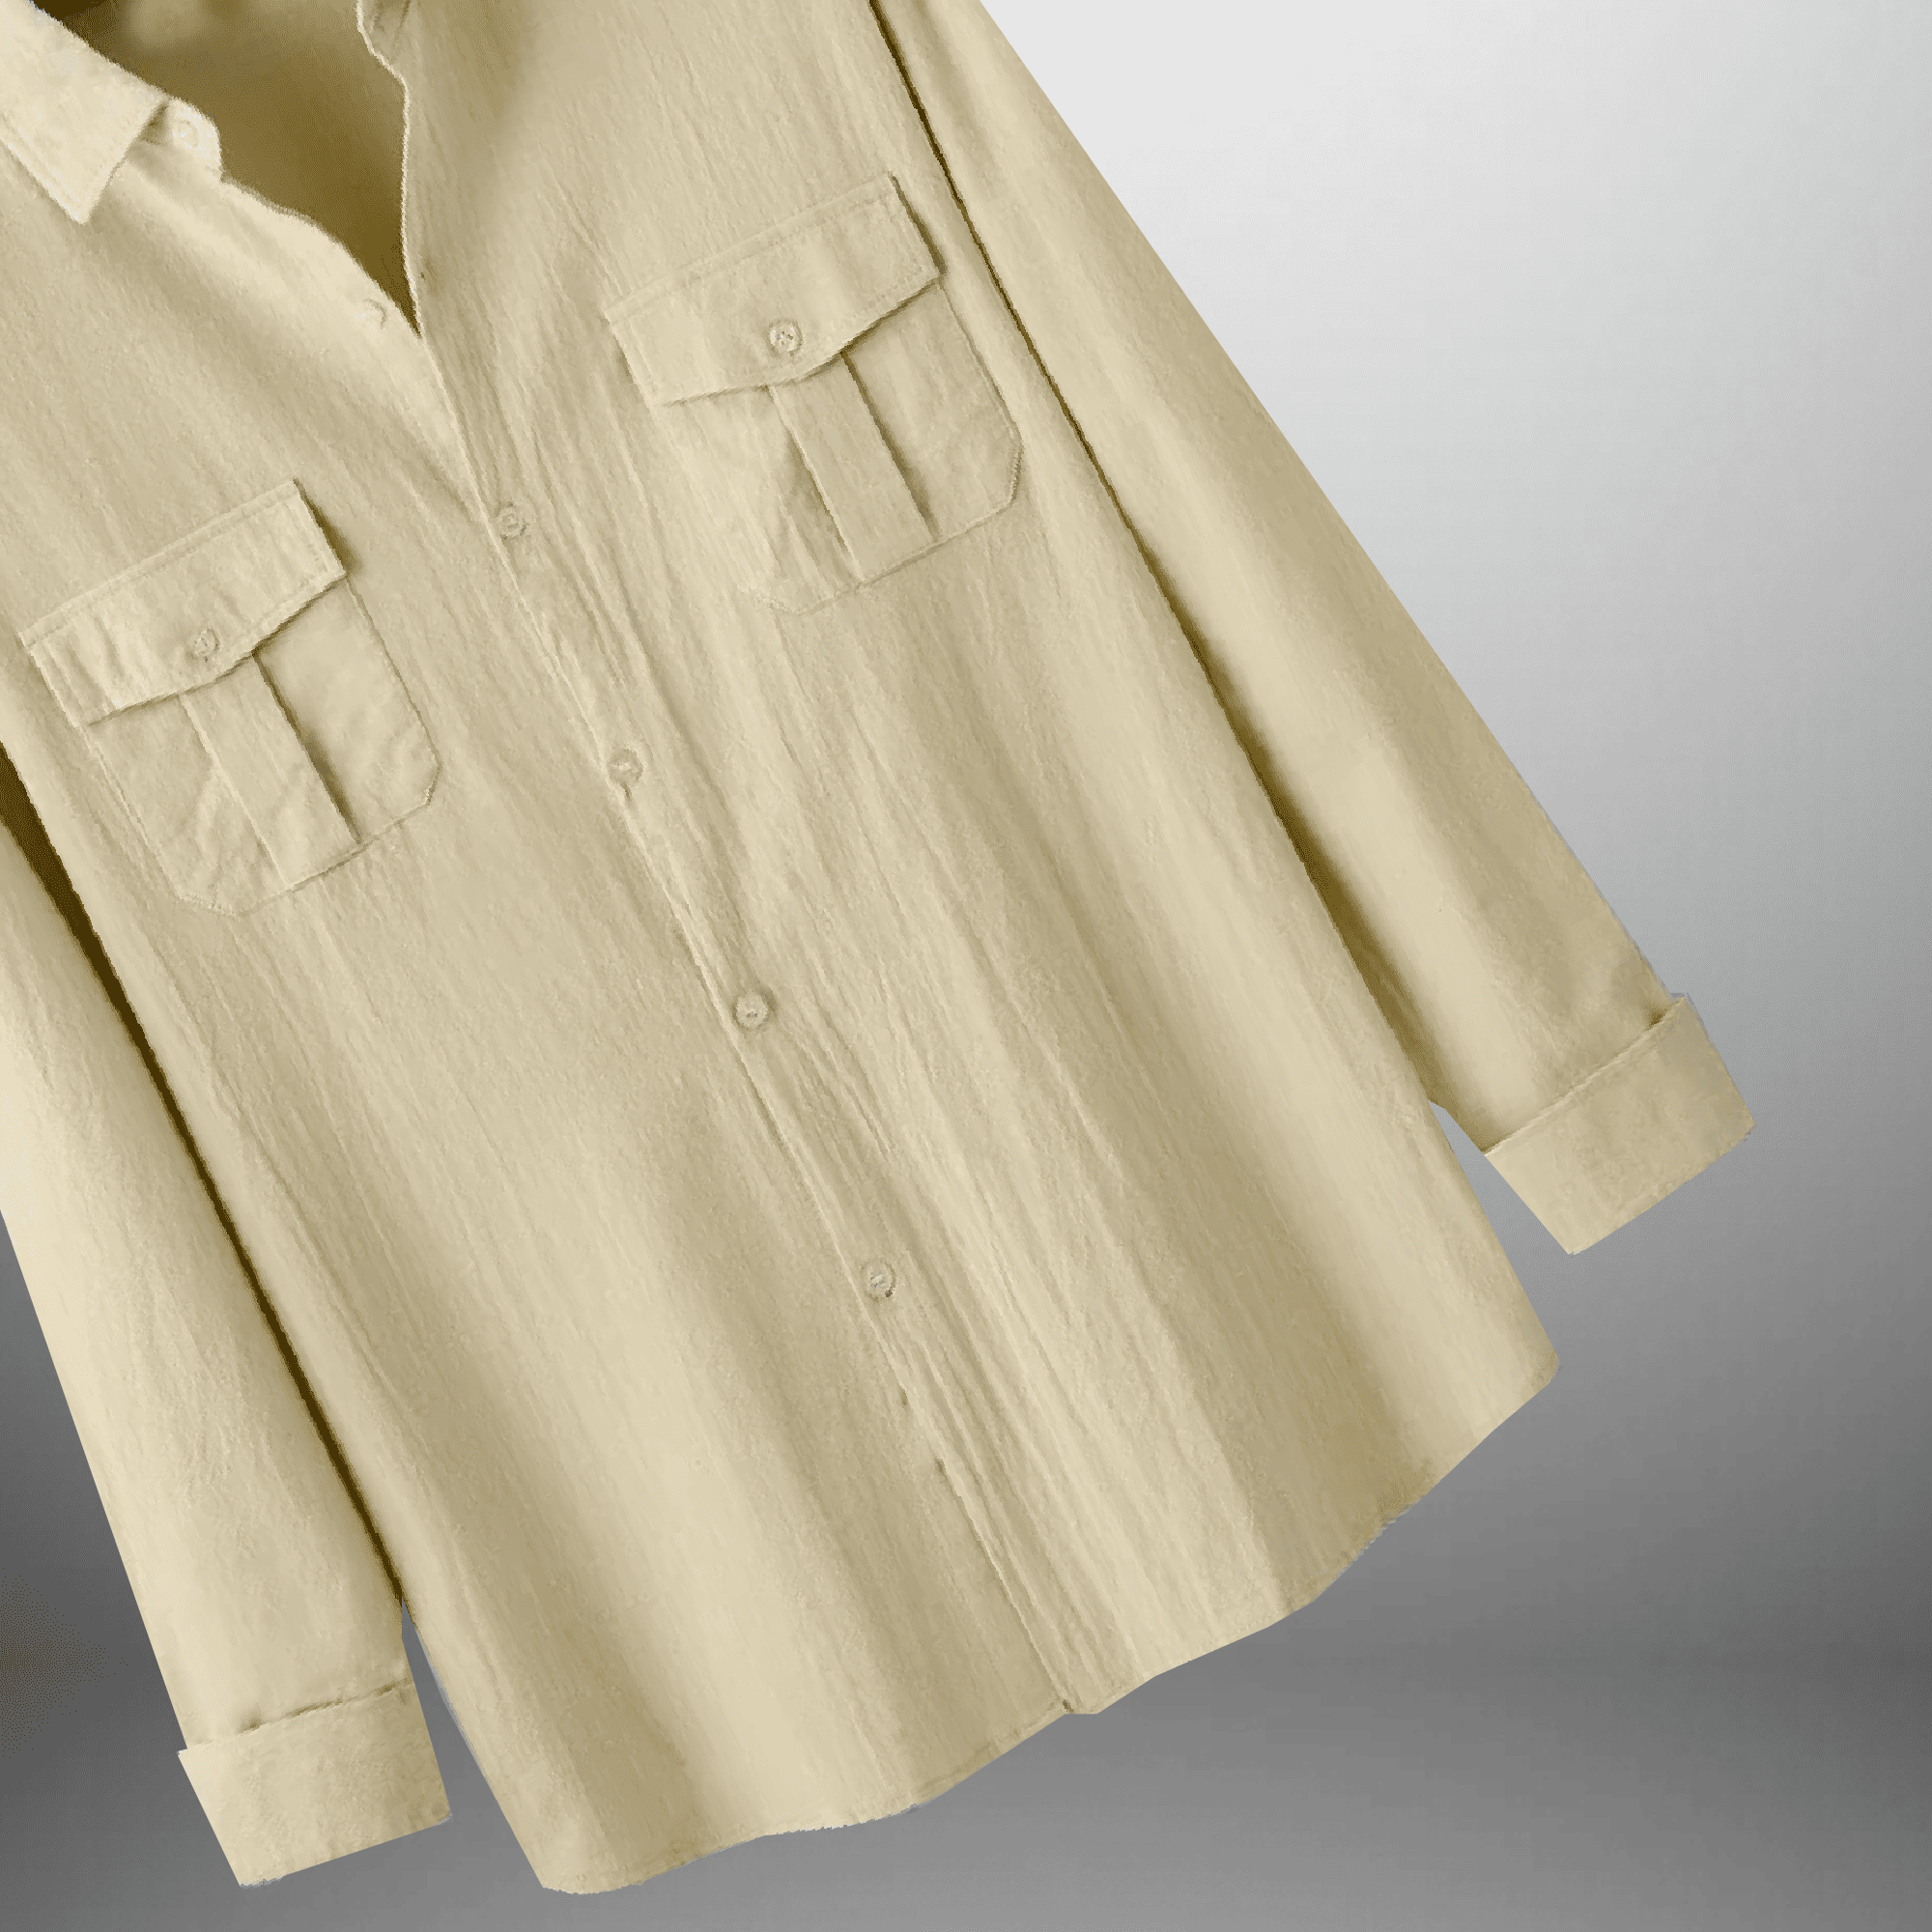 Men's light yellow linen shirt with front pockets-RMS001